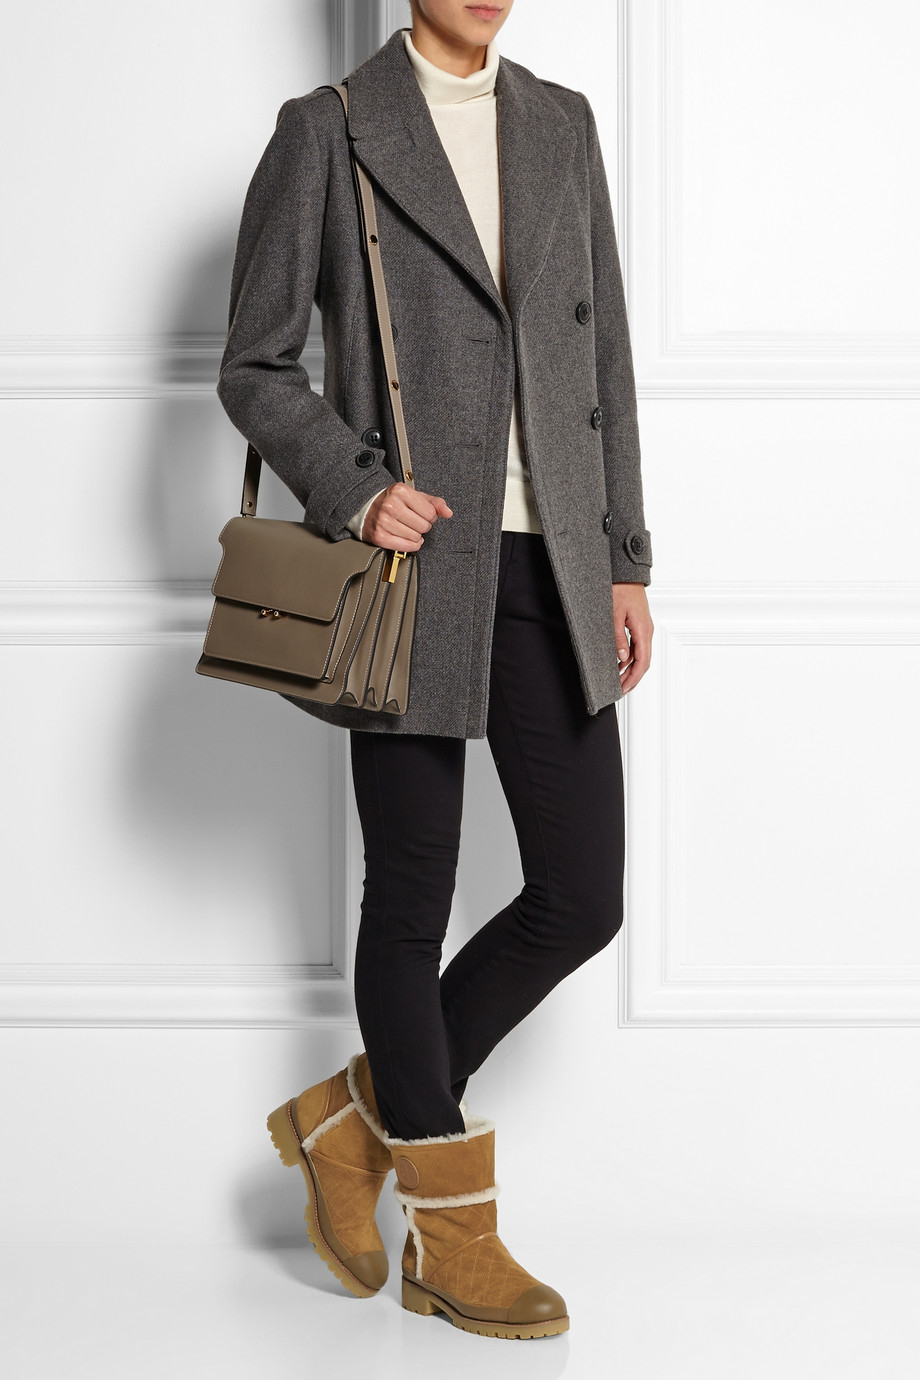 Lyst - Tory Burch Boughton Shearling-Lined Suede Boots in Brown